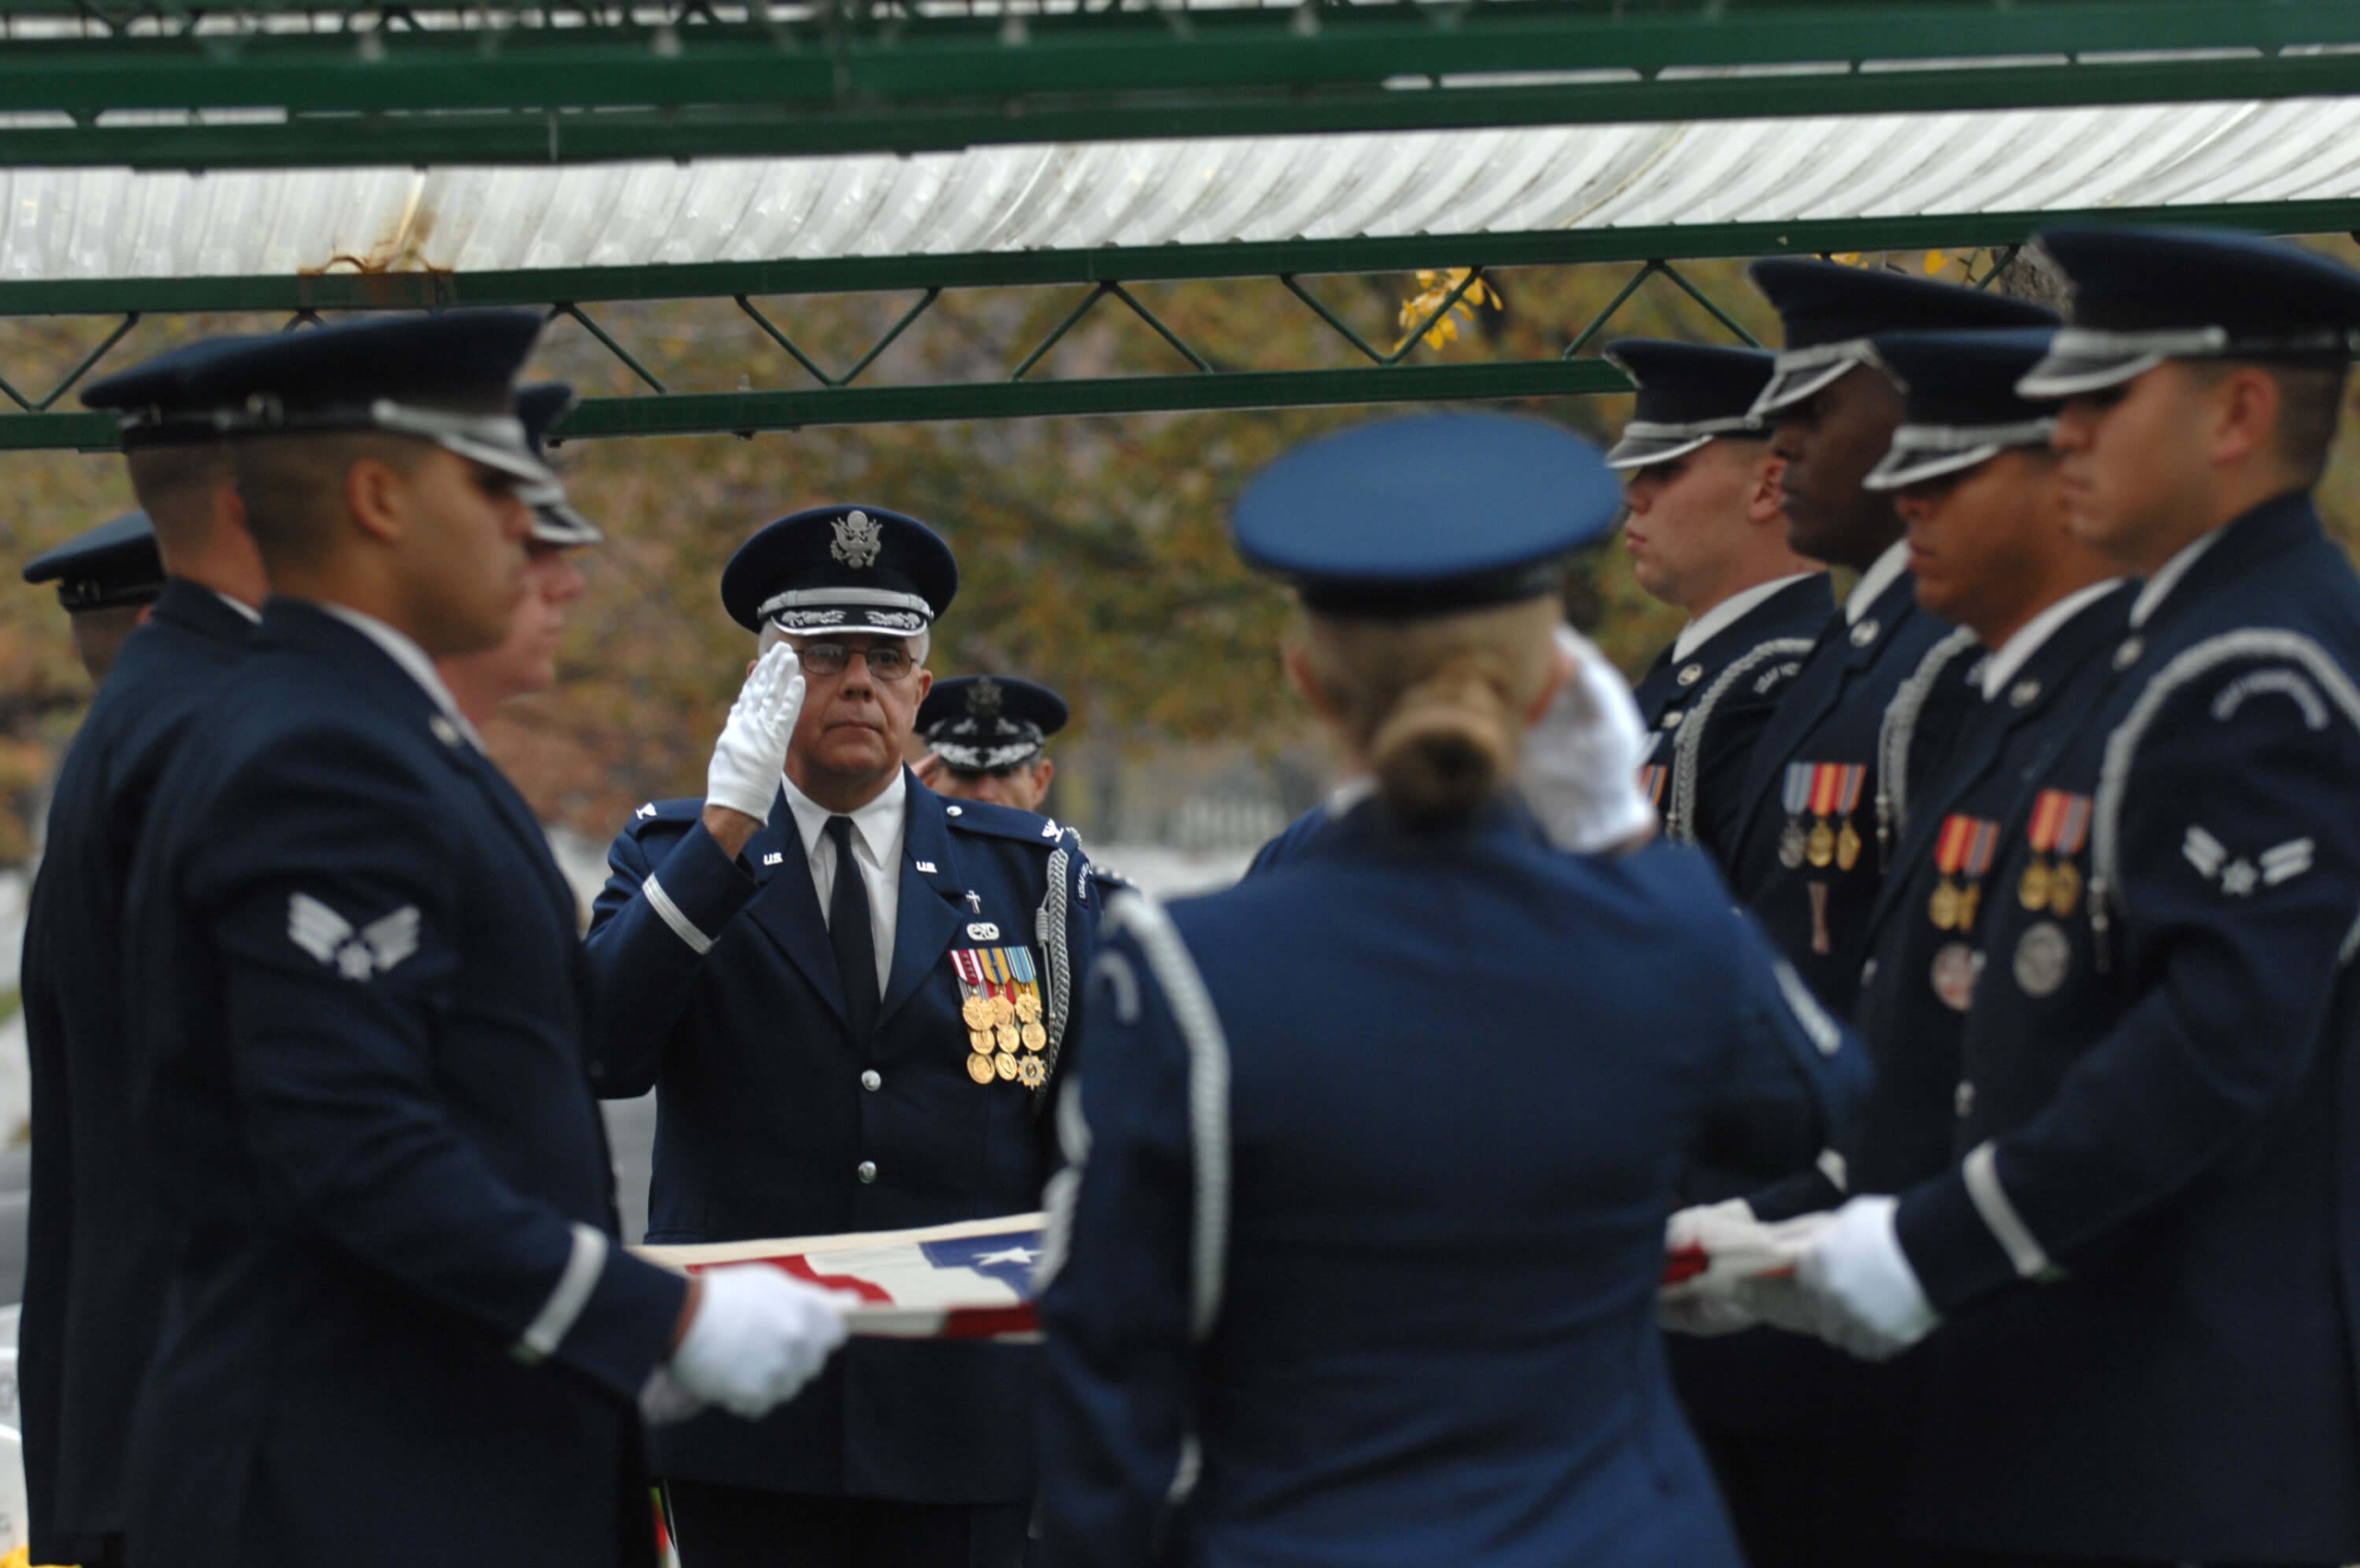 usaf-crew-funeral-services-photo-november-2008-011